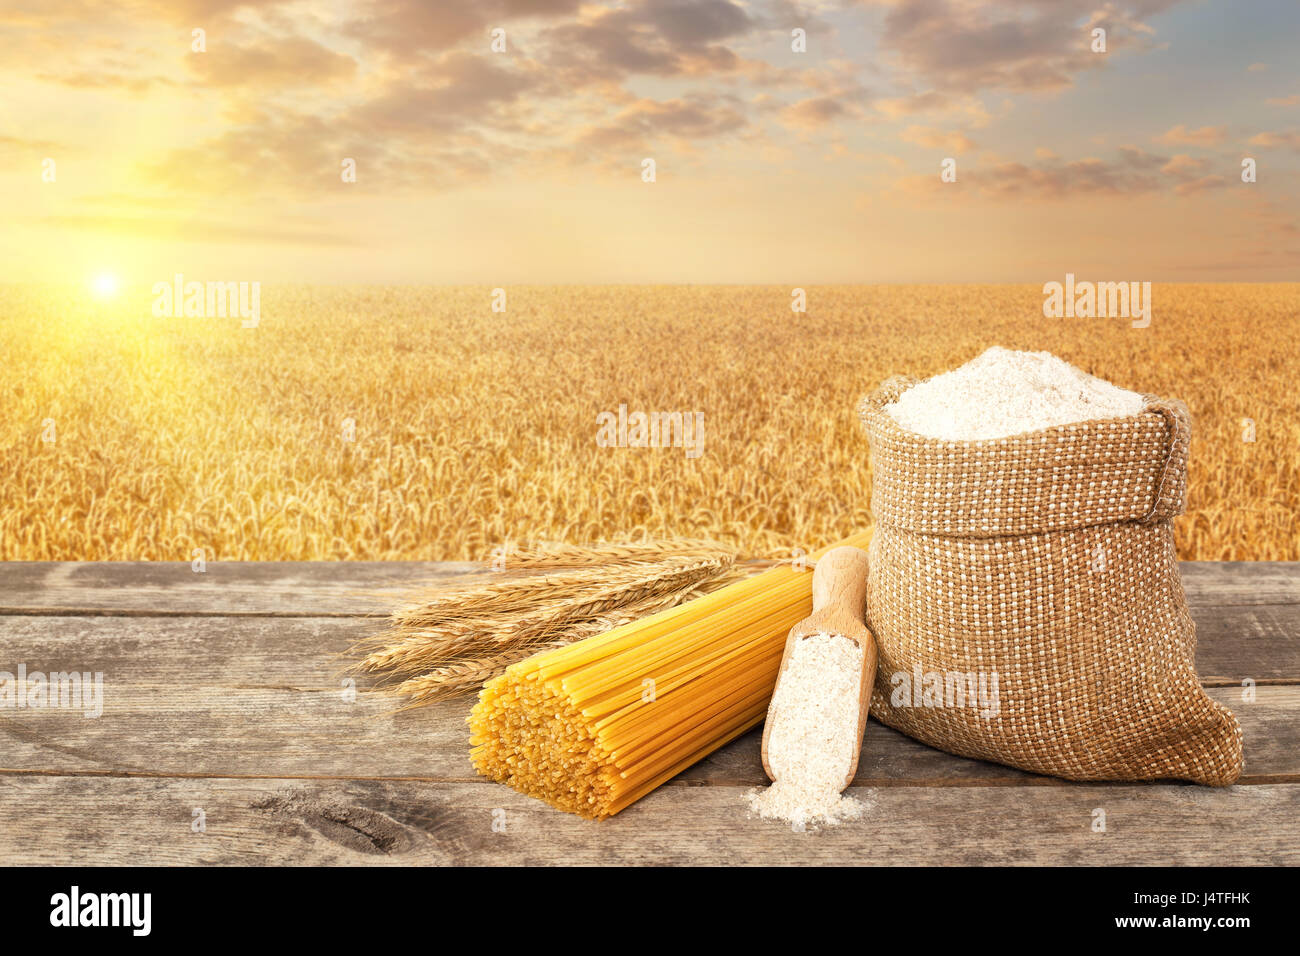 Download Uncooked Pasta From Durum Wheat Wholegrain Flour In Bag And Scoop On Stock Photo Alamy Yellowimages Mockups